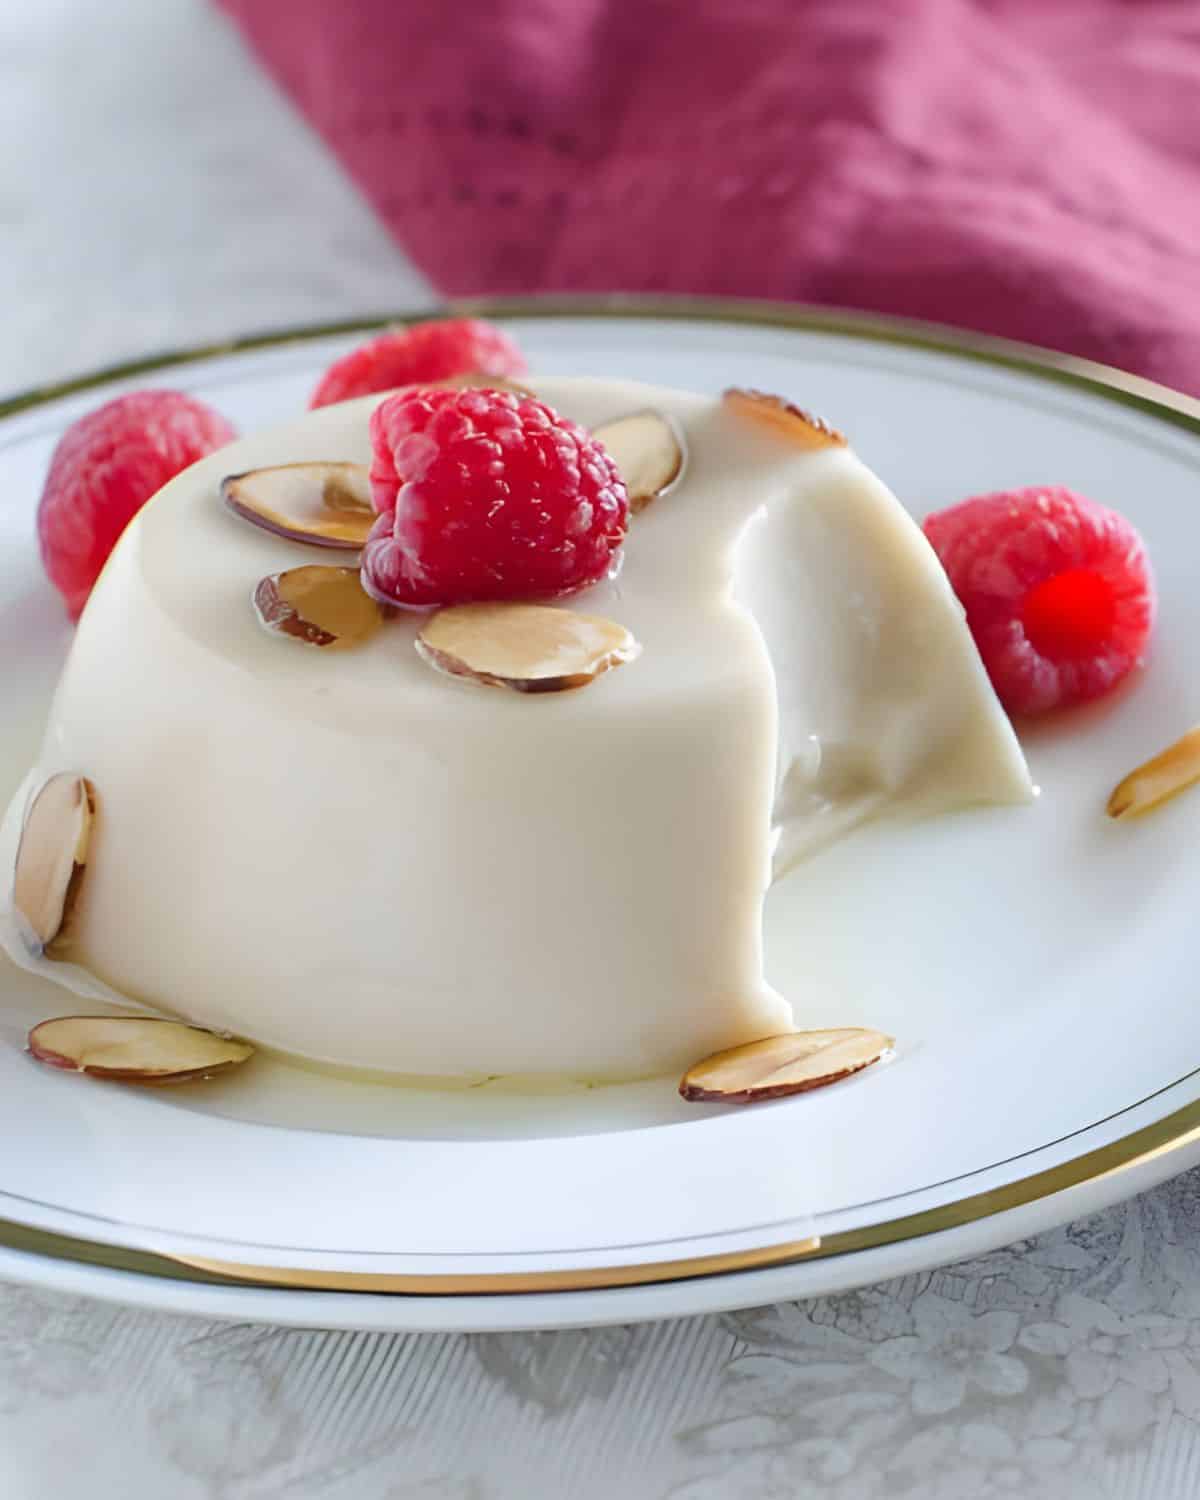 Toasted Almond Dream Panna Cotta on a plate with raspberries.